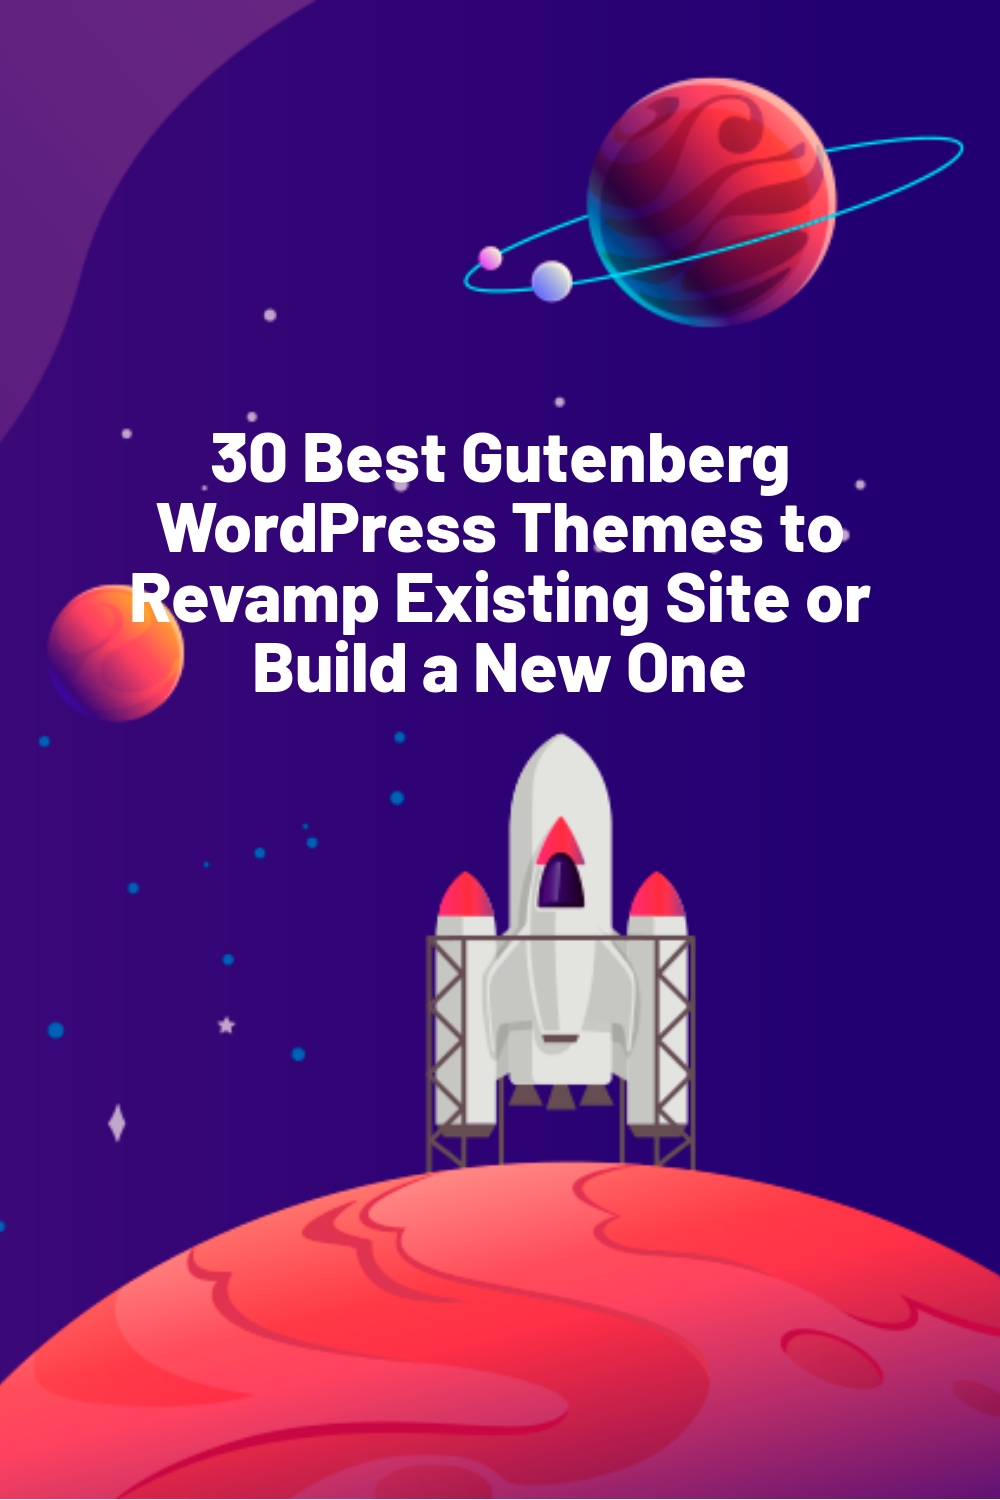 30 Best Gutenberg WordPress Themes to Revamp Existing Site or Build a New One